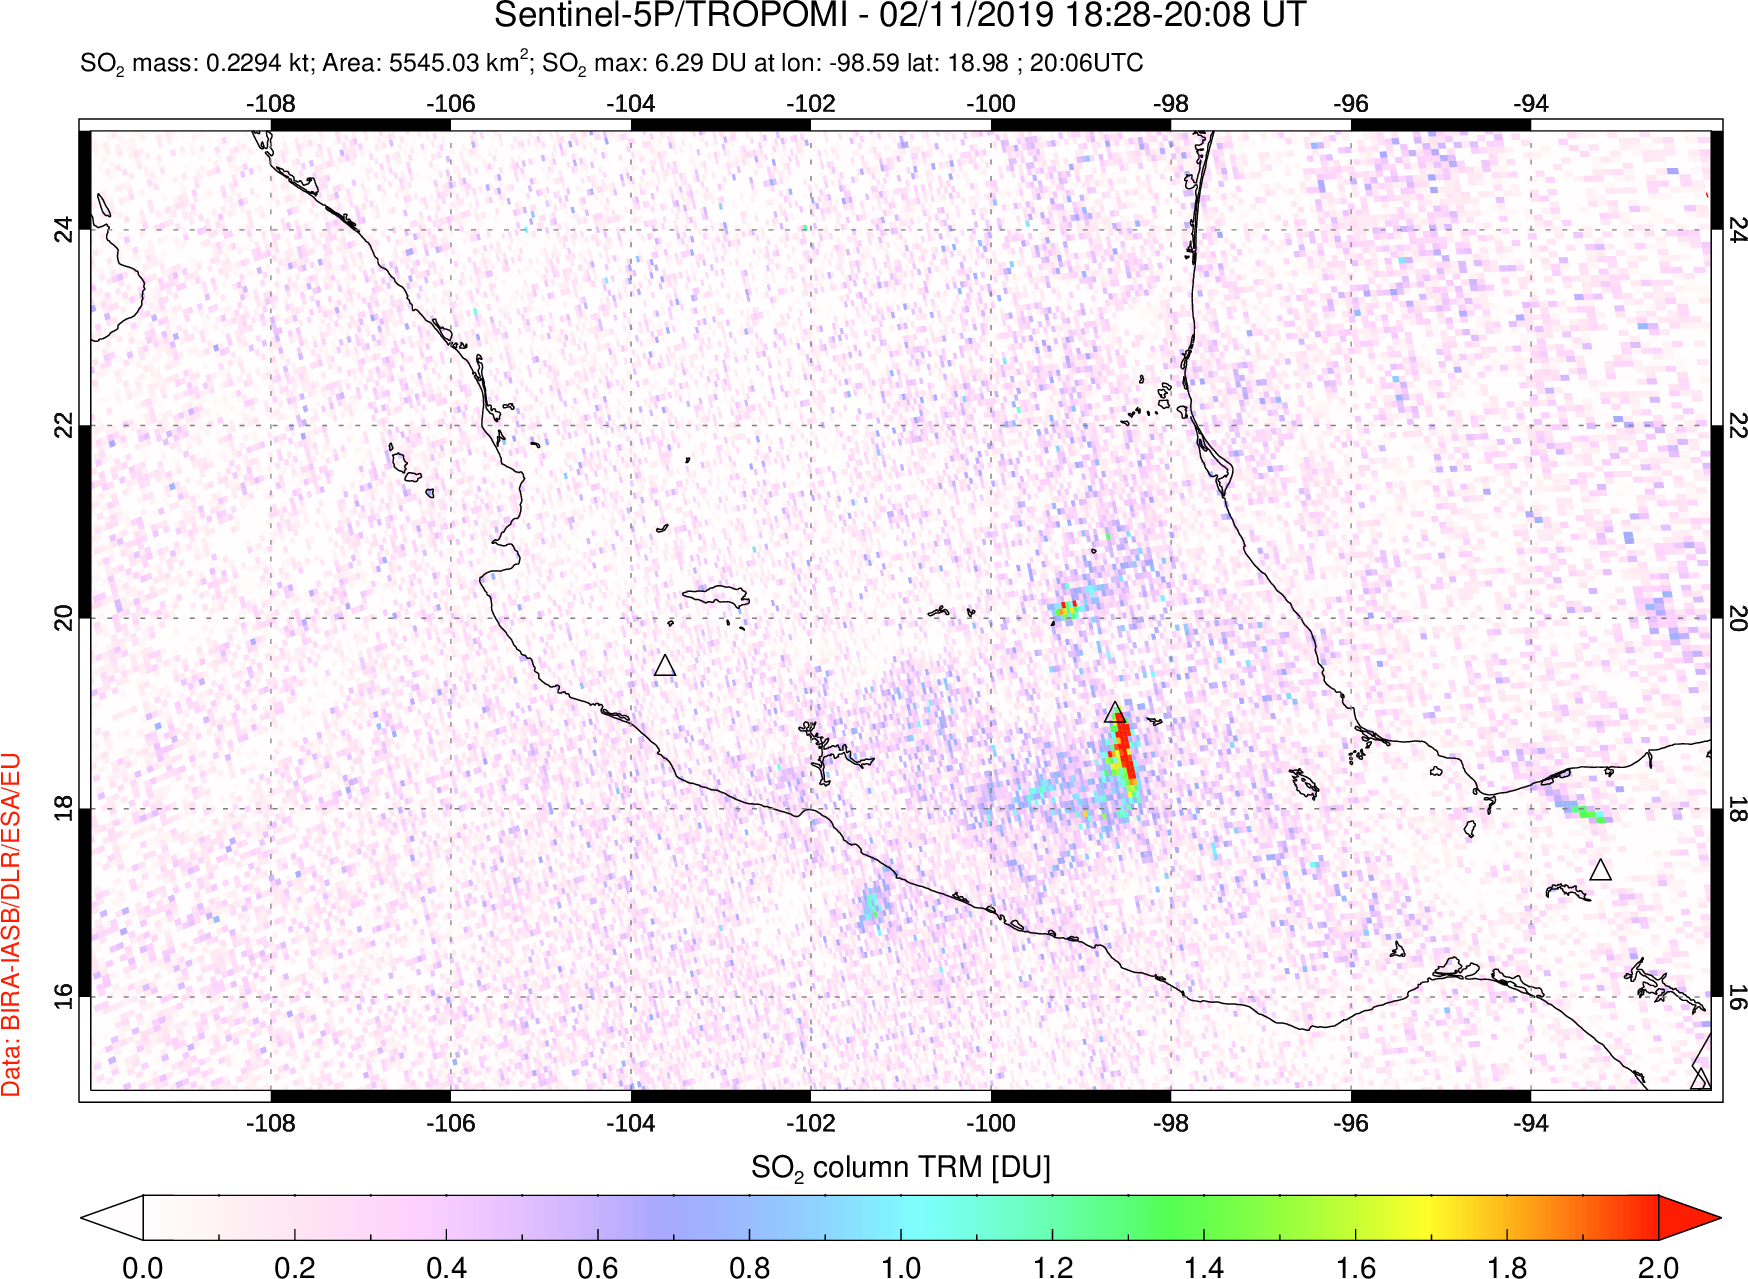 A sulfur dioxide image over Mexico on Feb 11, 2019.